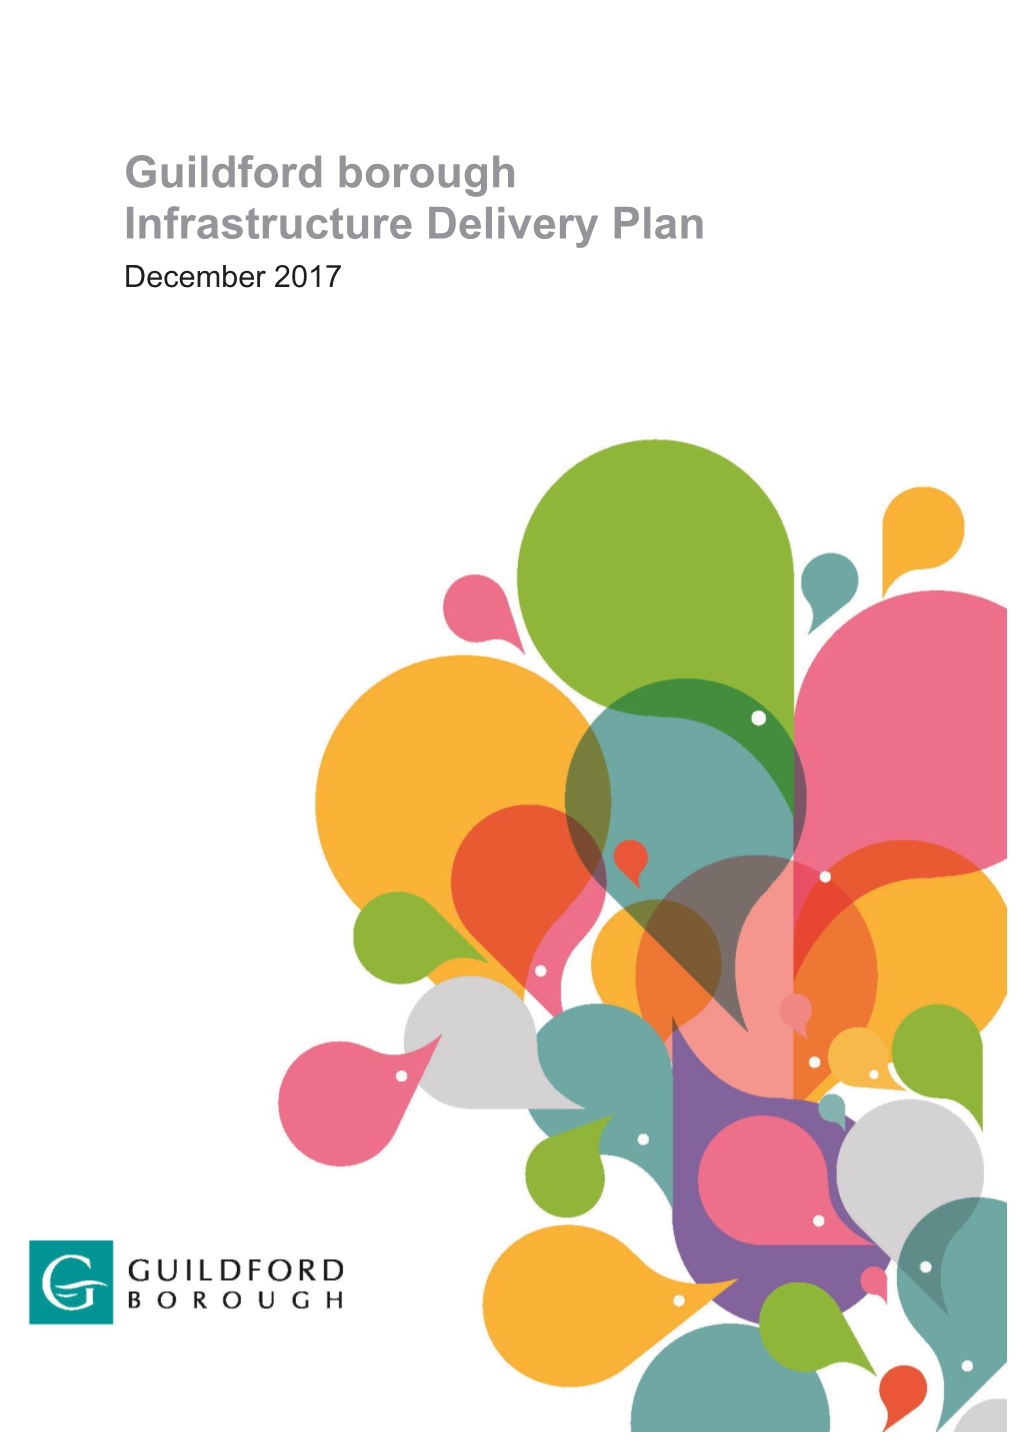 Guildford Borough Infrastructure Delivery Plan December 2017